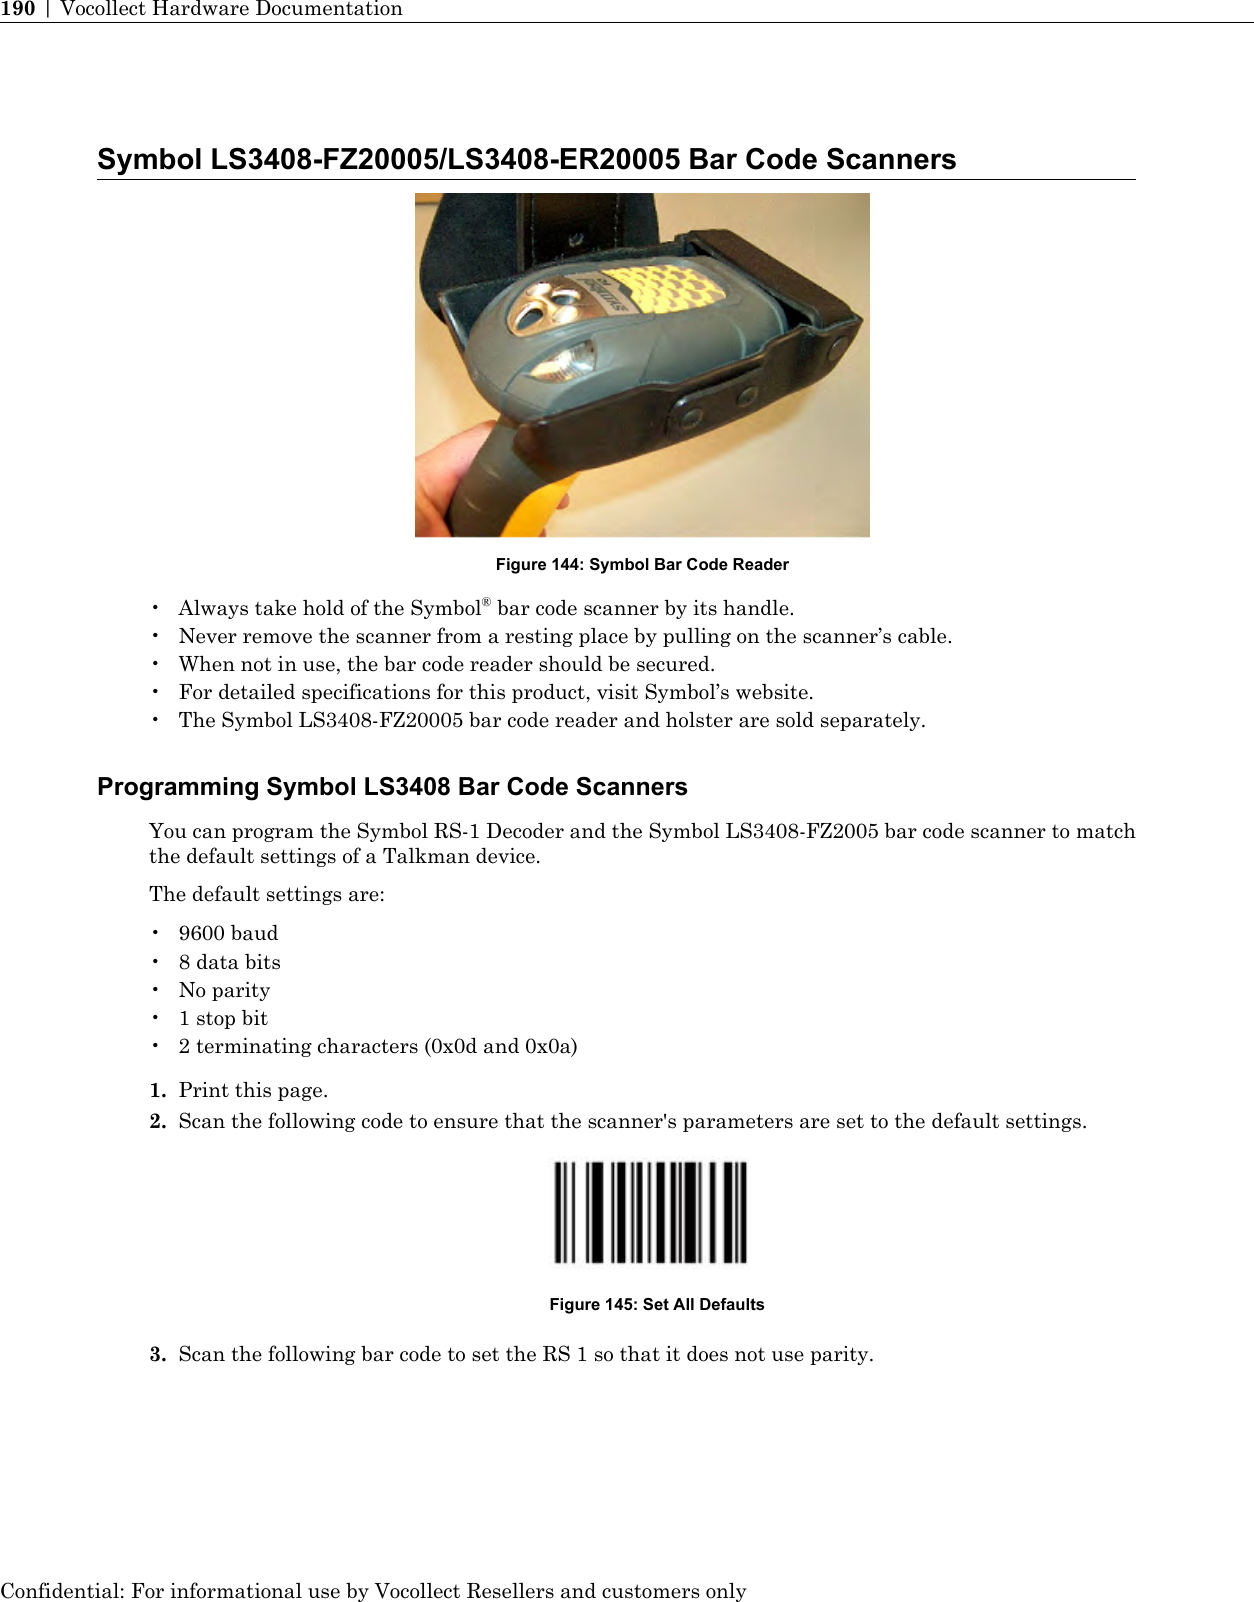 Symbol LS3408-FZ20005/LS3408-ER20005 Bar Code ScannersFigure 144: Symbol Bar Code Reader• Always take hold of the Symbol®bar code scanner by its handle.• Never remove the scanner from a resting place by pulling on the scanner’s cable.• When not in use, the bar code reader should be secured.• For detailed specifications for this product, visit Symbol’s website.• The Symbol LS3408-FZ20005 bar code reader and holster are sold separately.Programming Symbol LS3408 Bar Code ScannersYou can program the Symbol RS-1 Decoder and the Symbol LS3408-FZ2005 bar code scanner to matchthe default settings of a Talkman device.The default settings are:• 9600 baud• 8 data bits• No parity• 1 stop bit• 2 terminating characters (0x0d and 0x0a)1. Print this page.2. Scan the following code to ensure that the scanner&apos;s parameters are set to the default settings.Figure 145: Set All Defaults3. Scan the following bar code to set the RS 1 so that it does not use parity.Confidential: For informational use by Vocollect Resellers and customers only190 | Vocollect Hardware Documentation